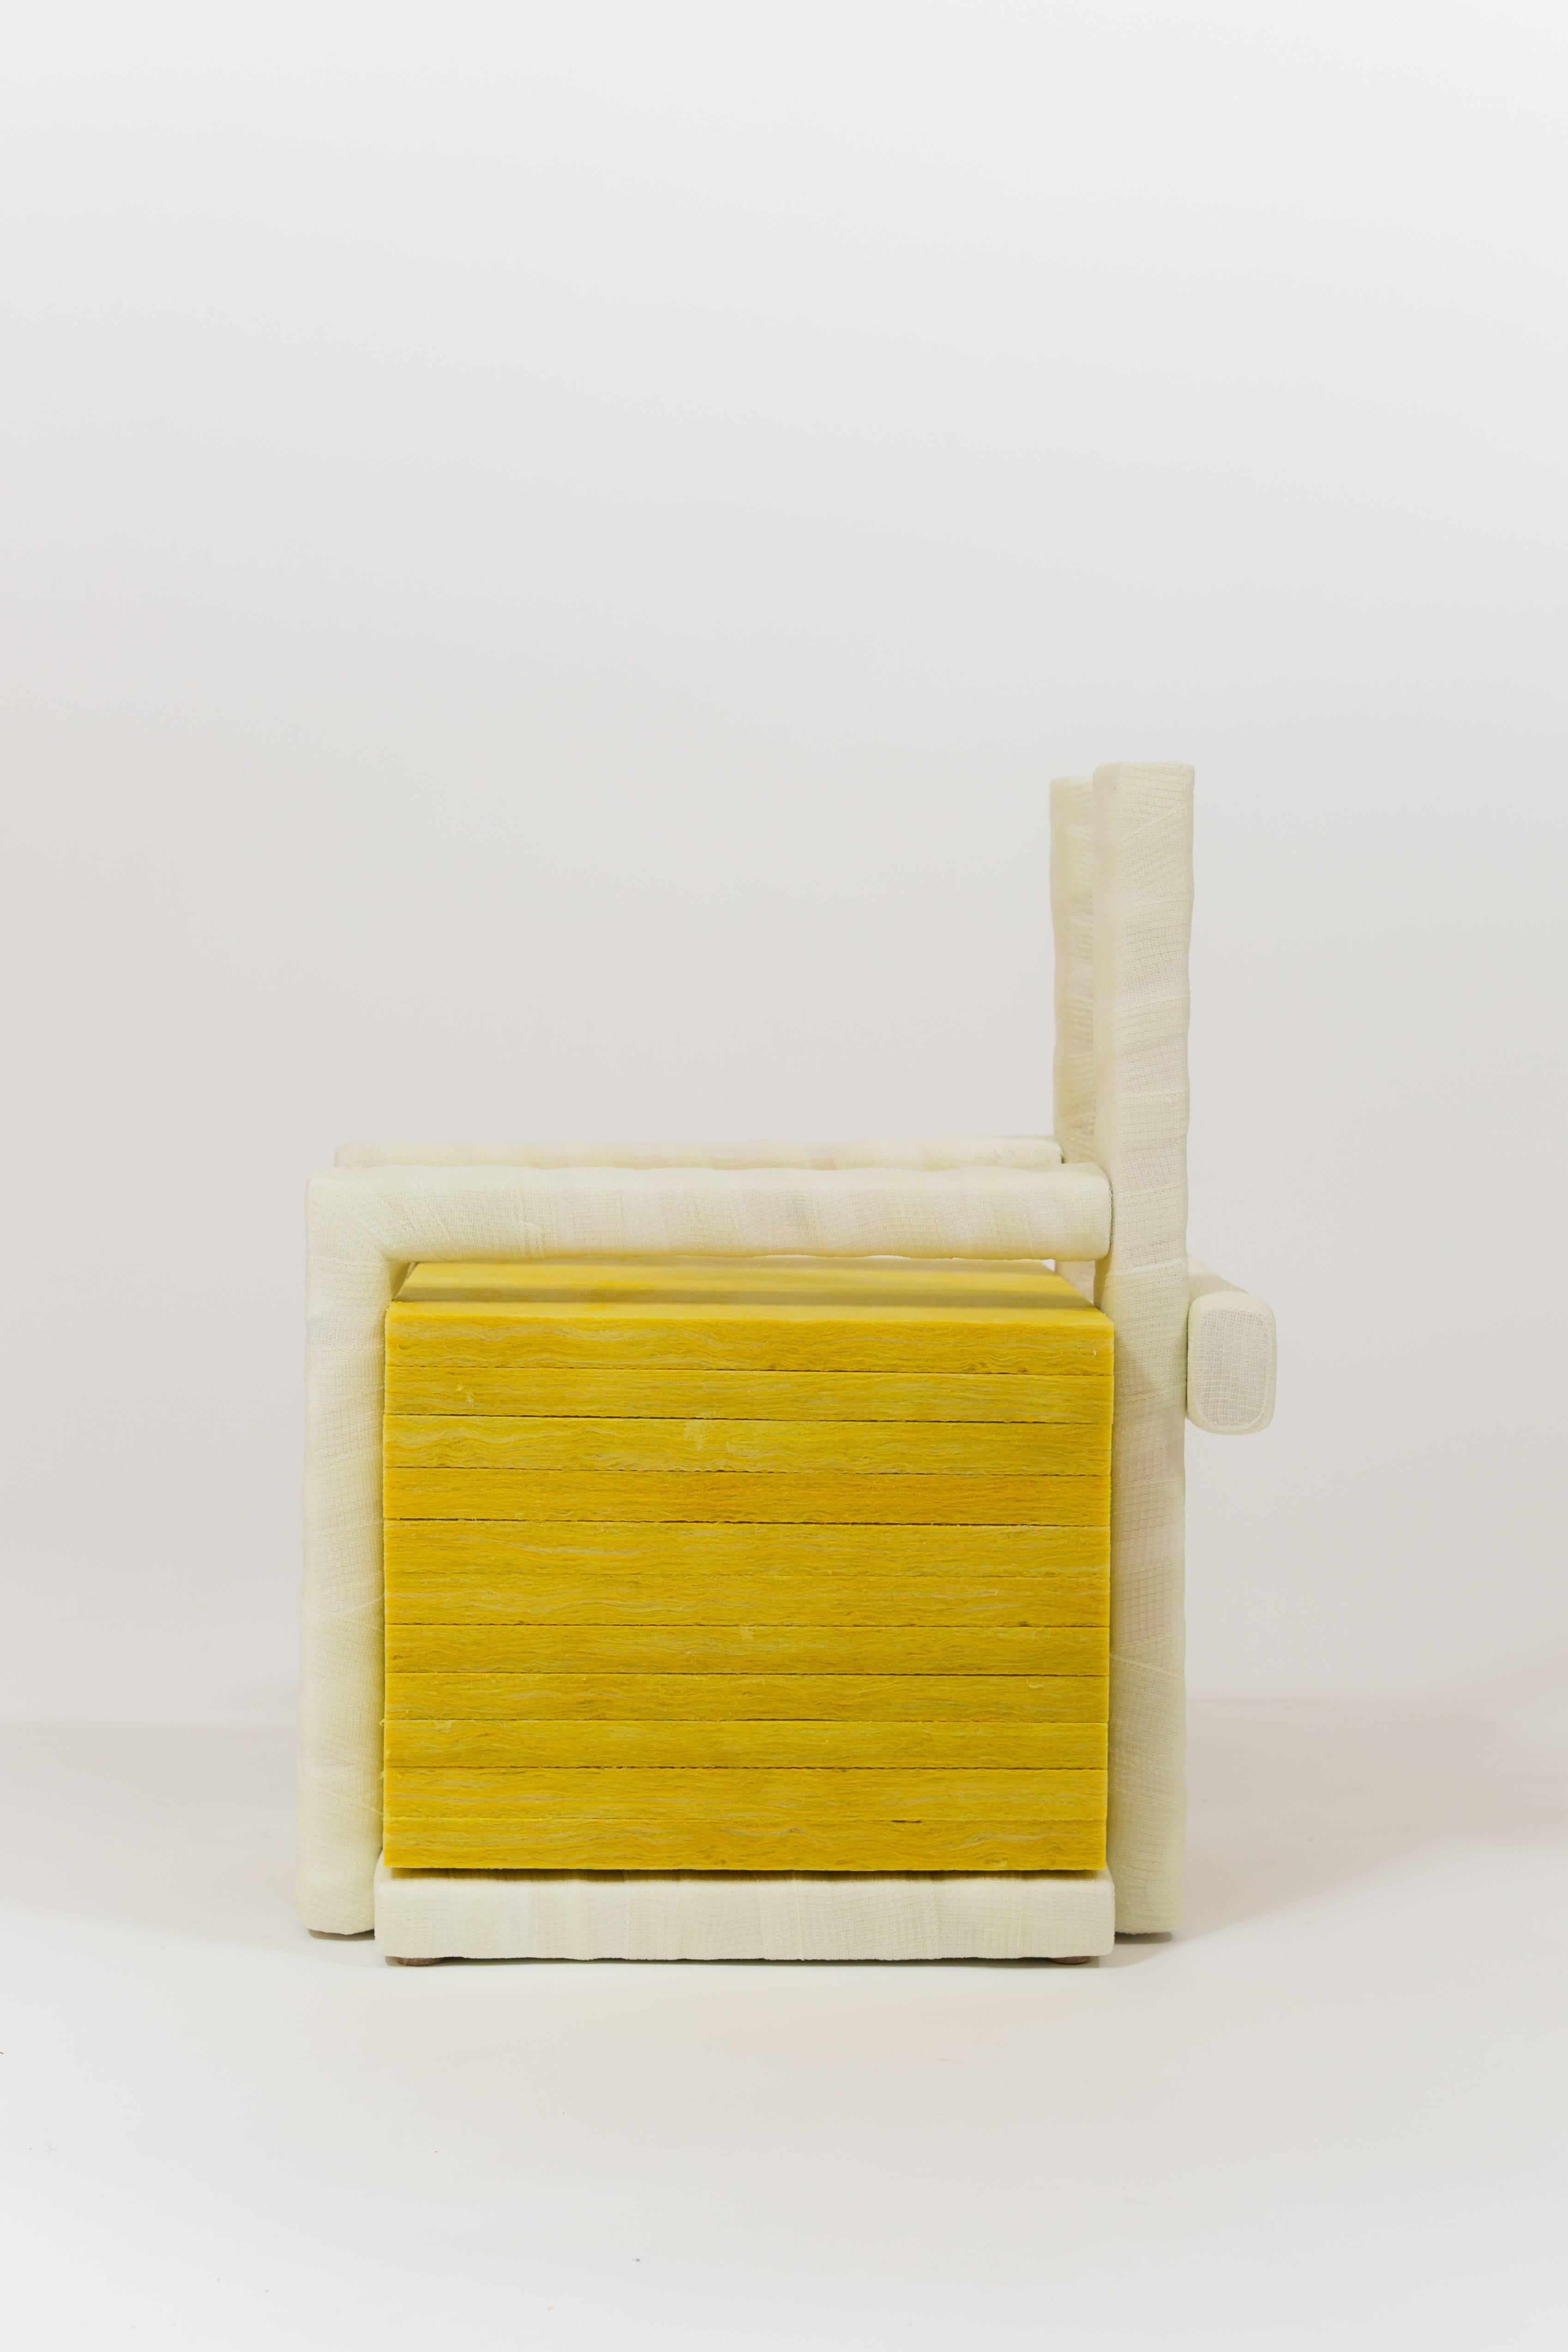 Post-Modern Isolated Stack, Modern Sculpture in Medical Cast Tape with Fiberglass Insulation